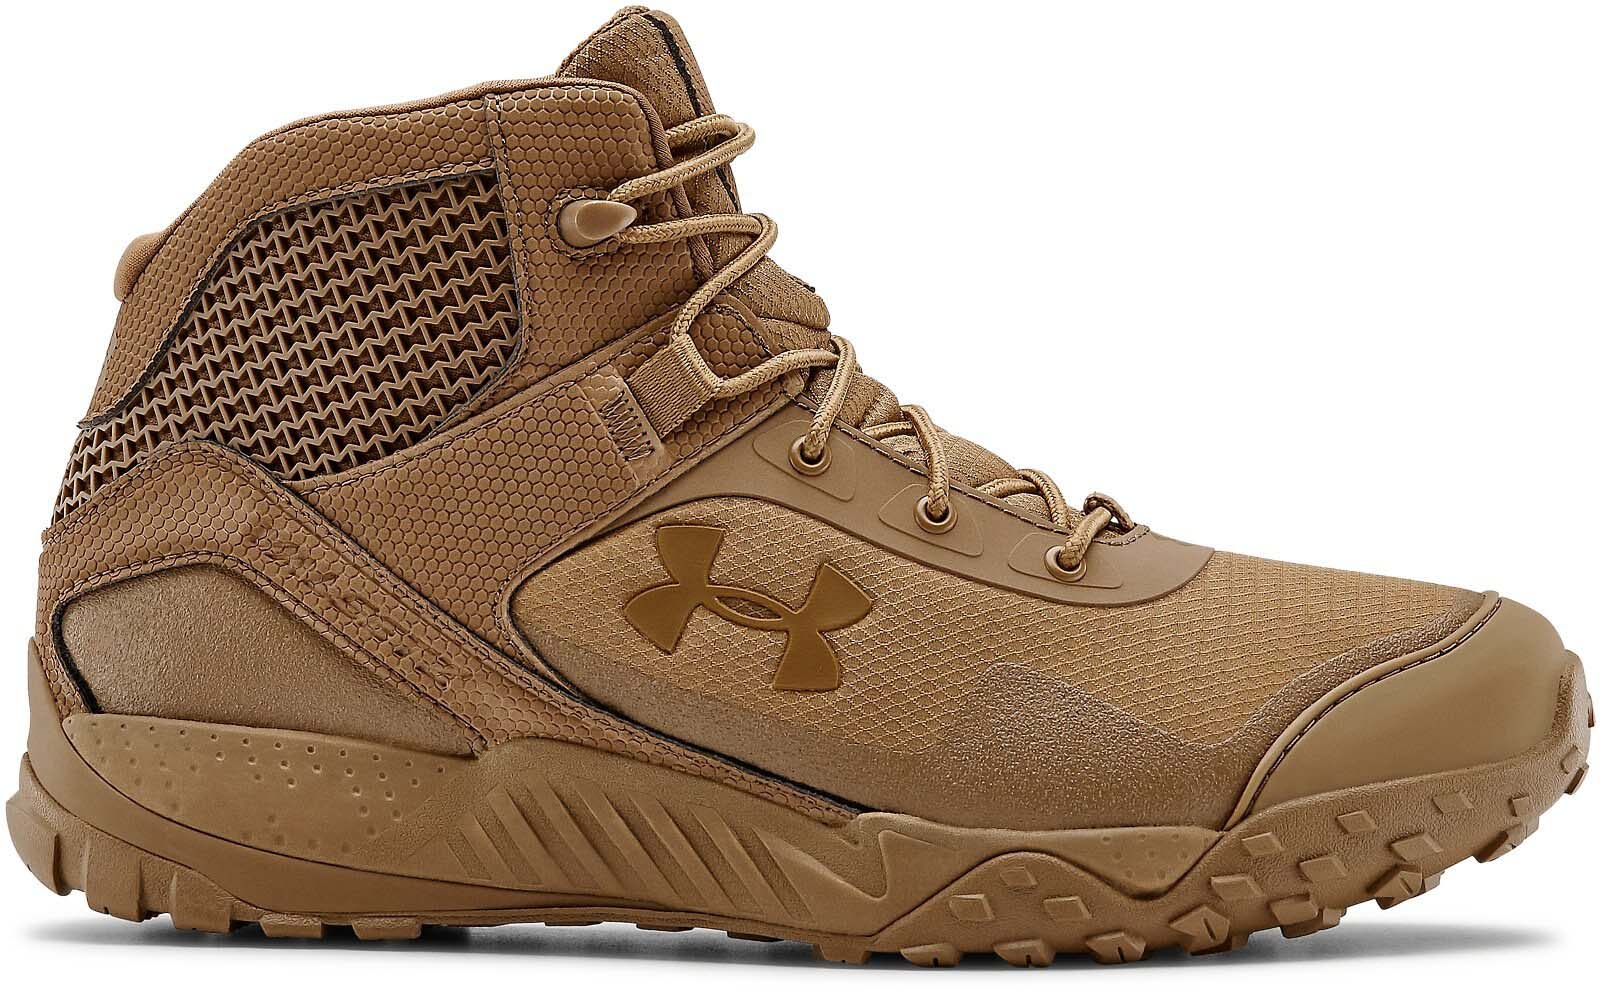 Under Armour UA Valsetz RTS 1.5 5in Tactical Boots - Men's w/ Free S&H